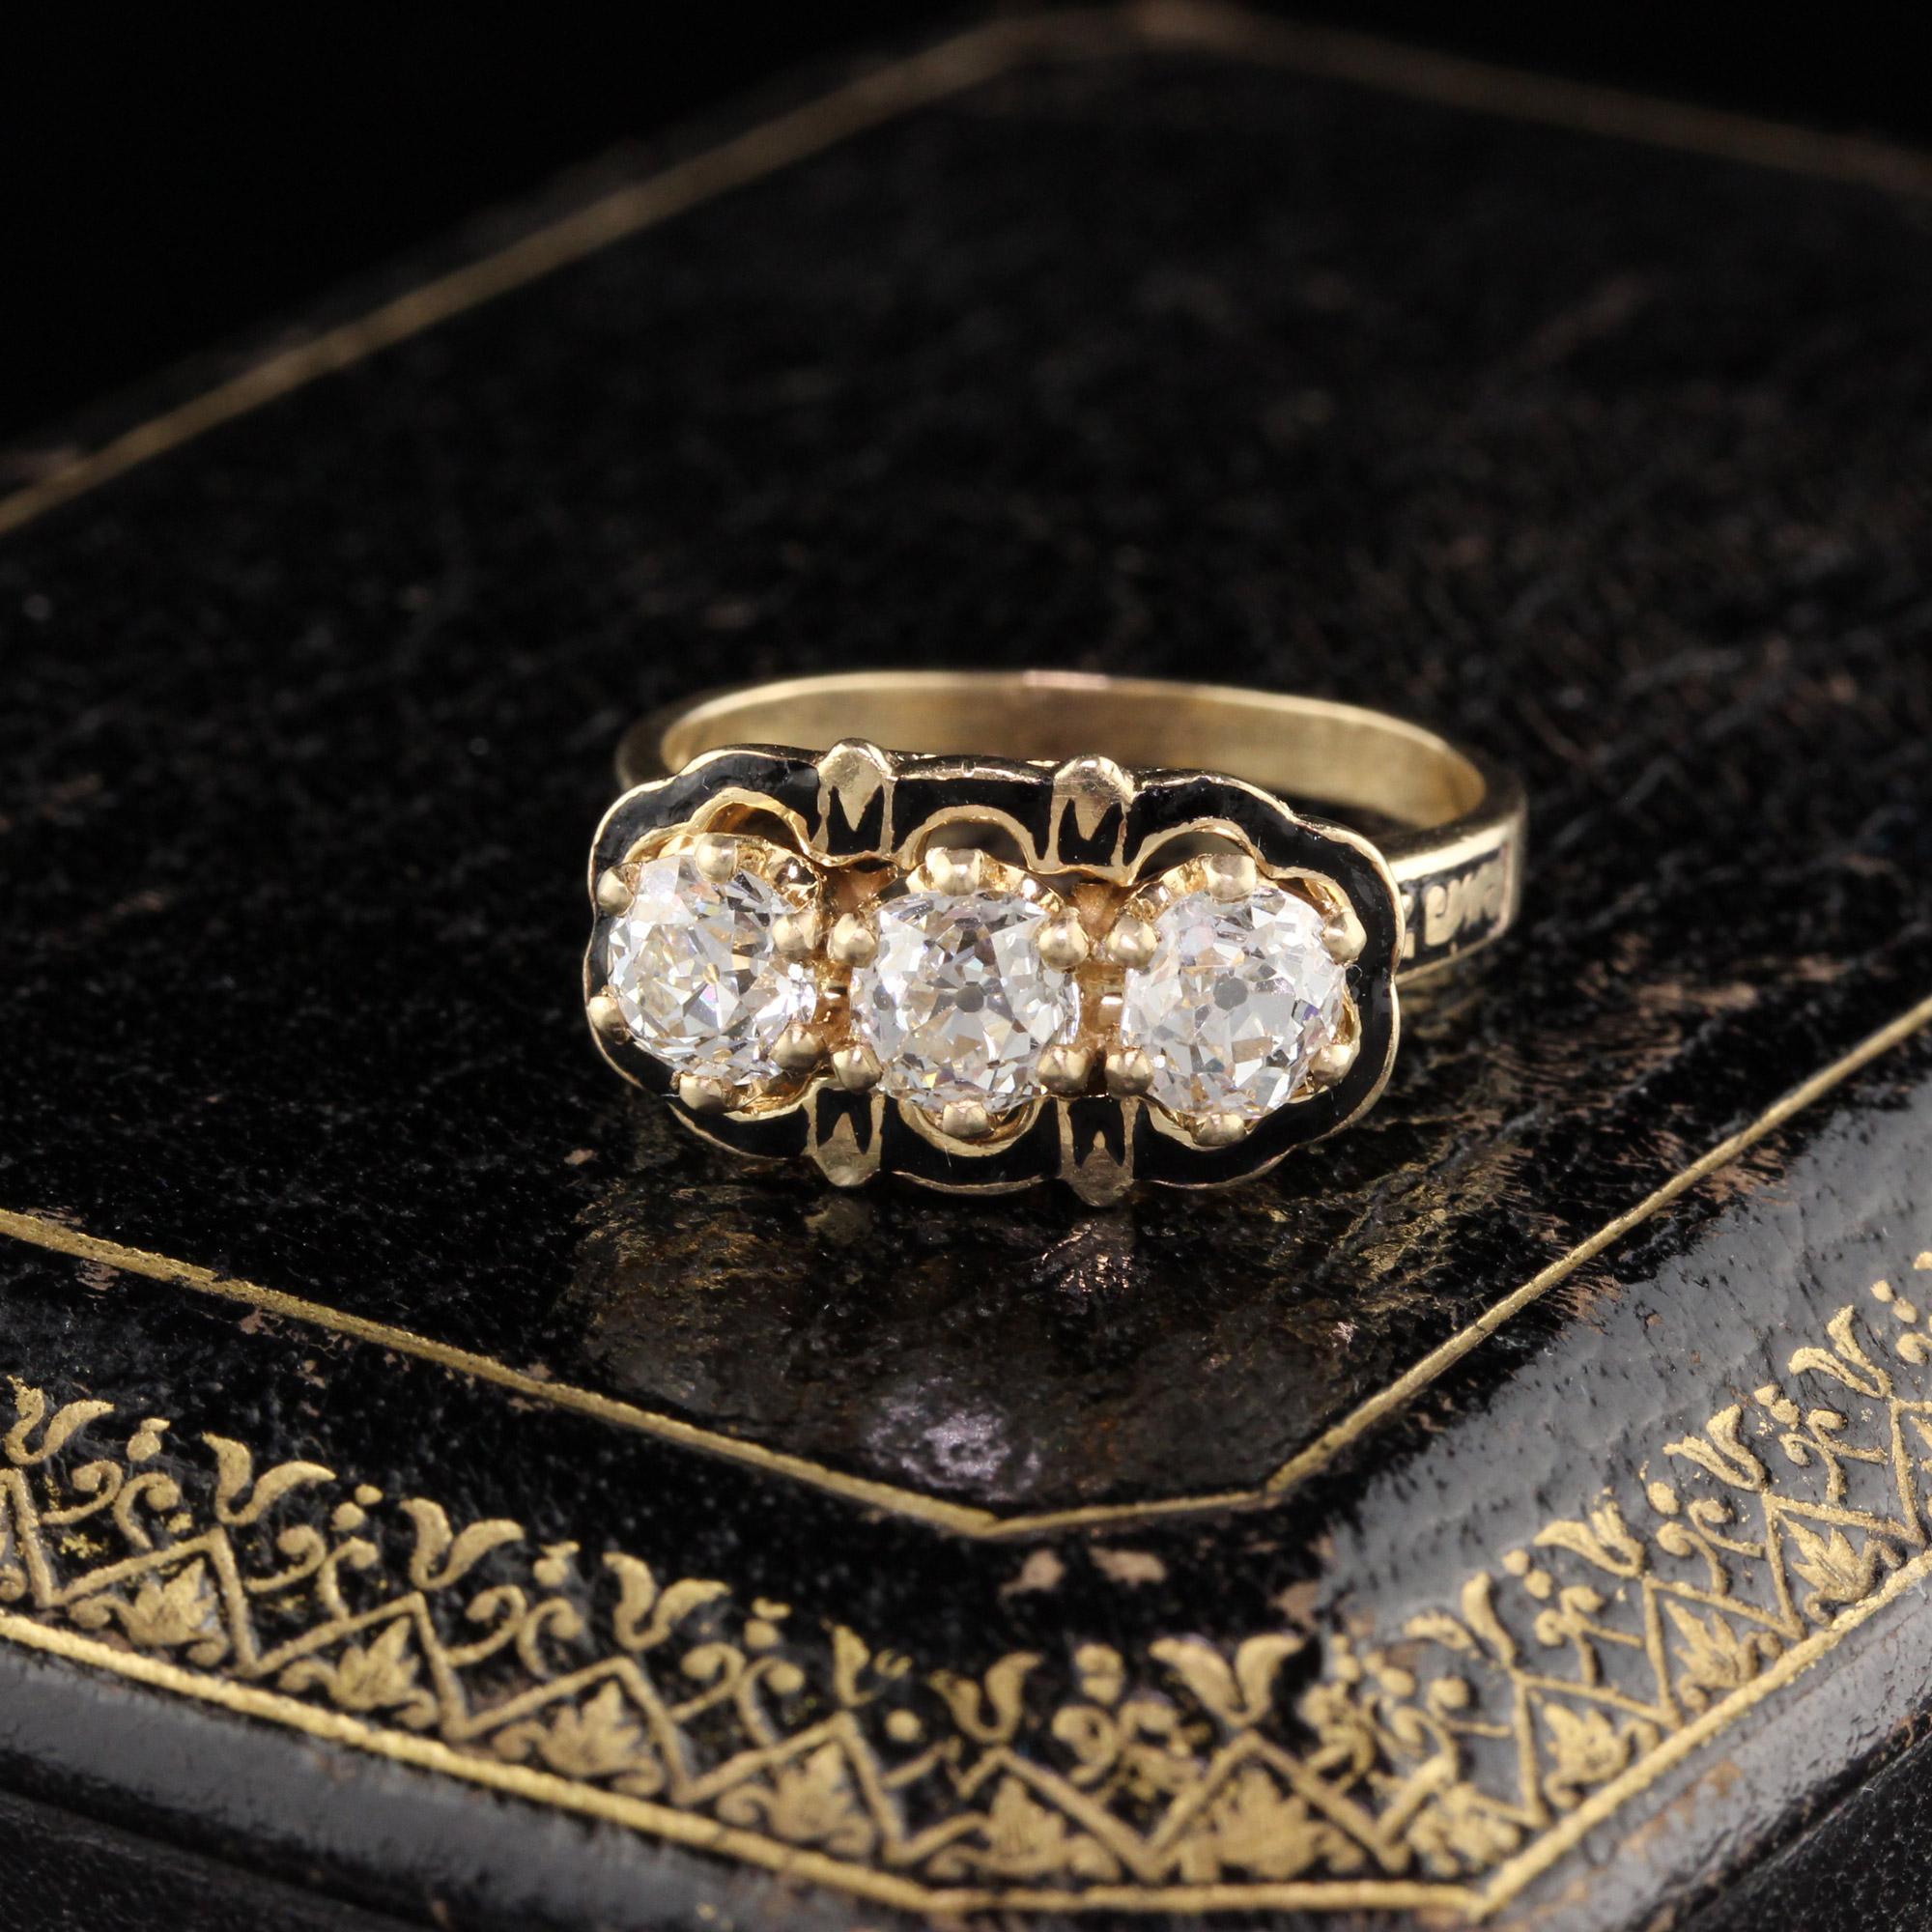 Beautiful & super unique Victorian 3 Stone Diamond Engagement ring in yellow gold with black enamel detailing. Enamel is in very good condition for its age. 

#R0399

Metal: 14K Yellow Gold 

Weight: 4.7 Grams

Diamond Weight: Approximately 1.35 cts